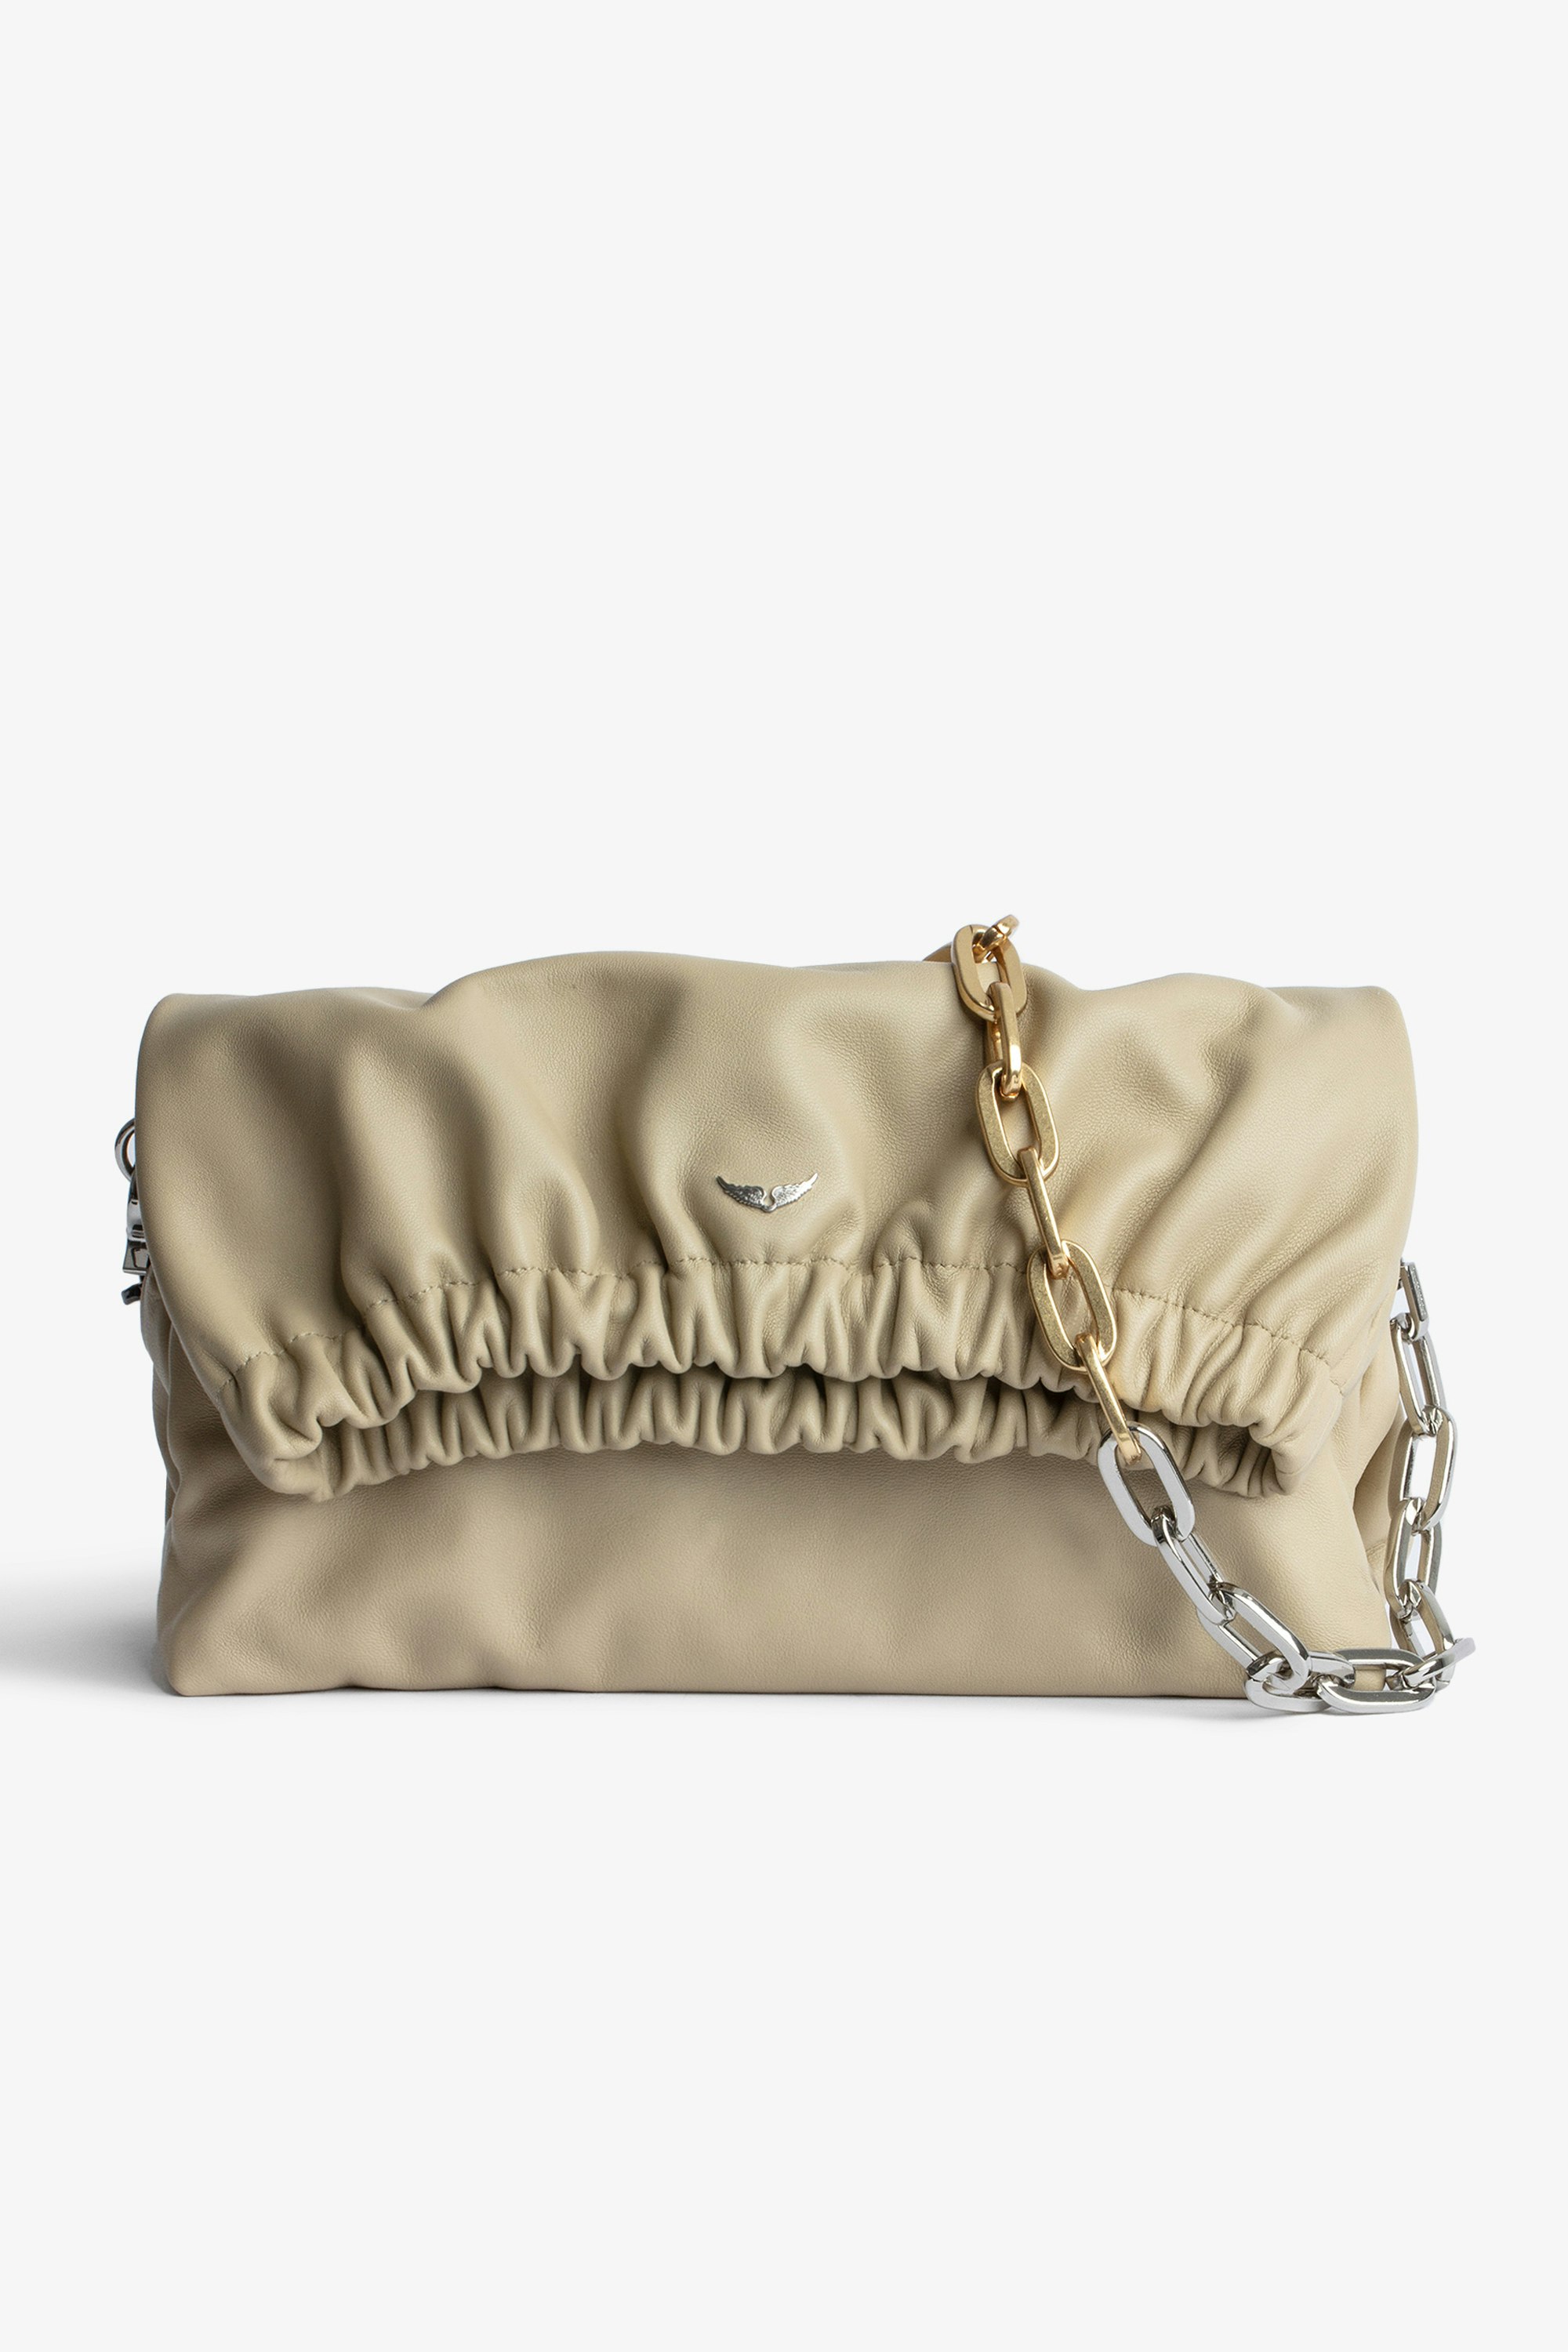 Rockyssime Bag - Women’s clutch bag in beige smooth leather with two-tone metal chain